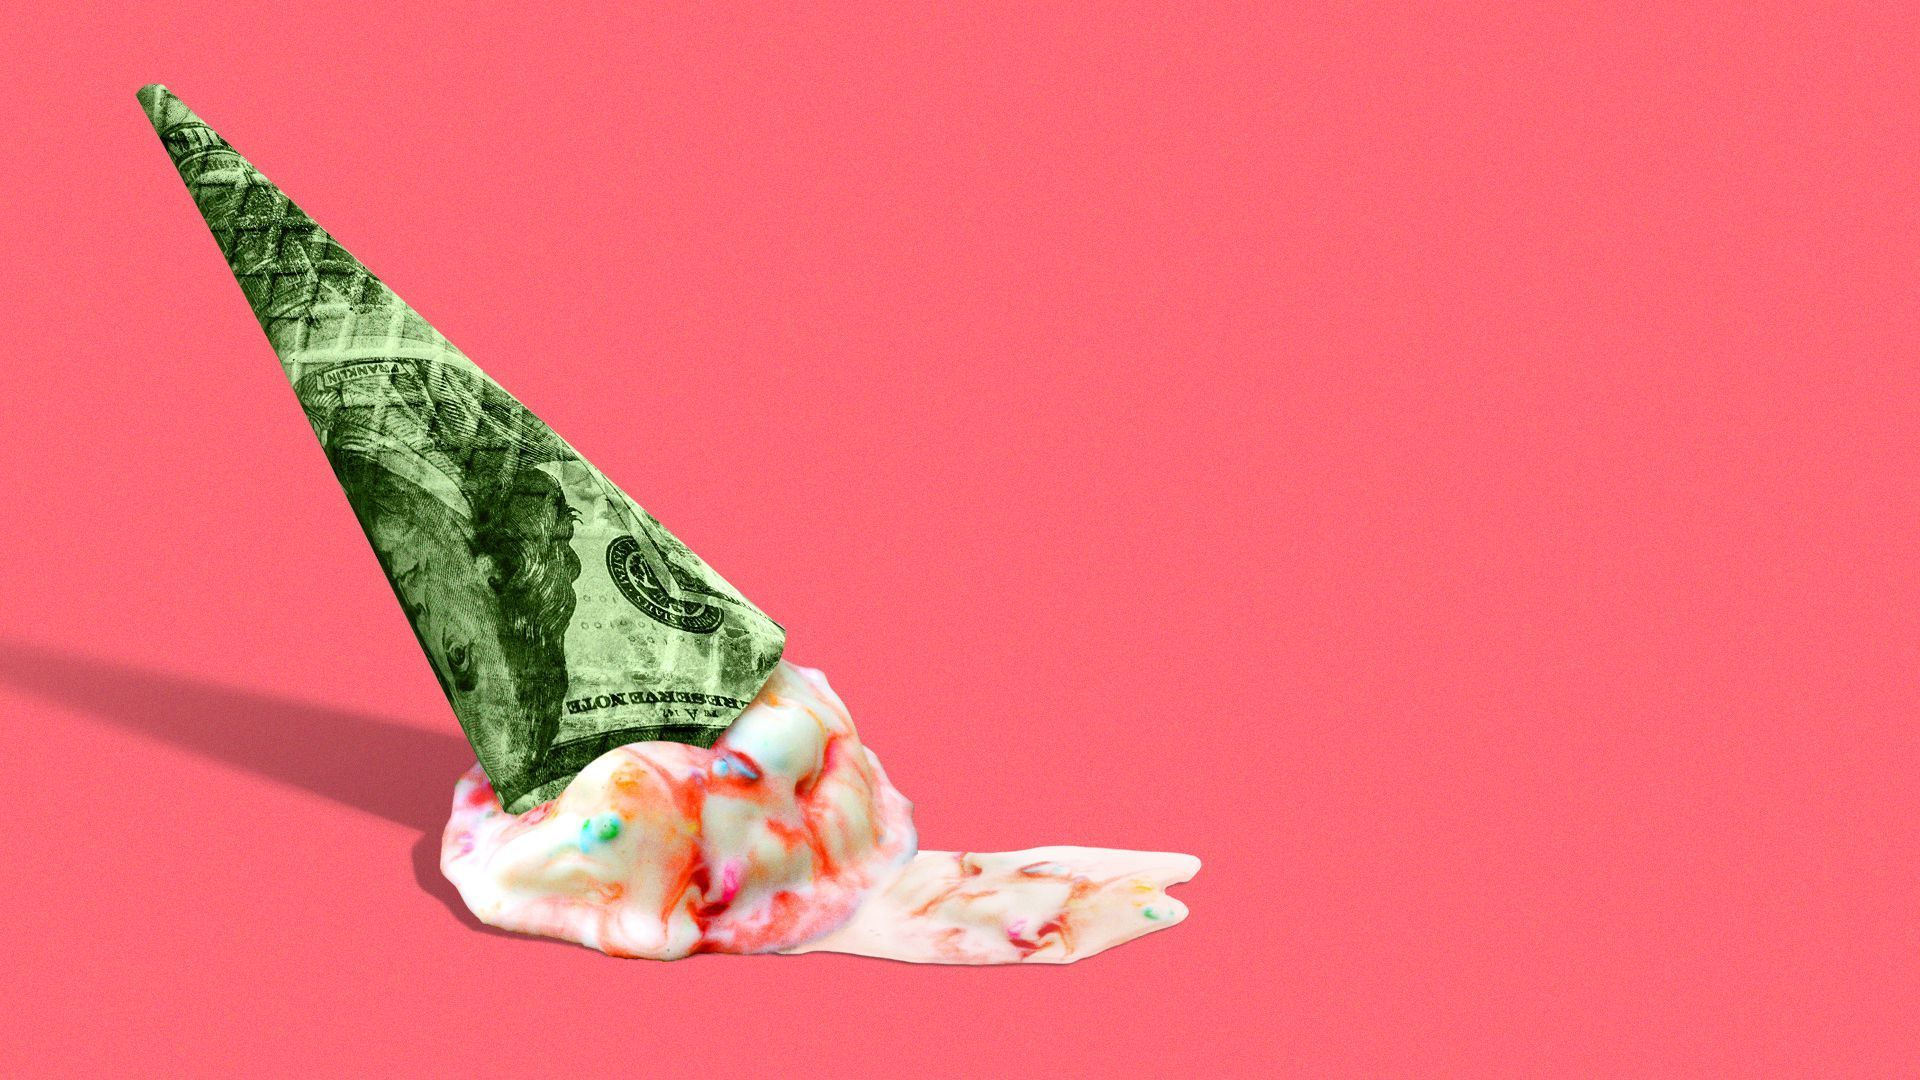 A cone with money on it is sitting in front of an ice cream - Ice cream